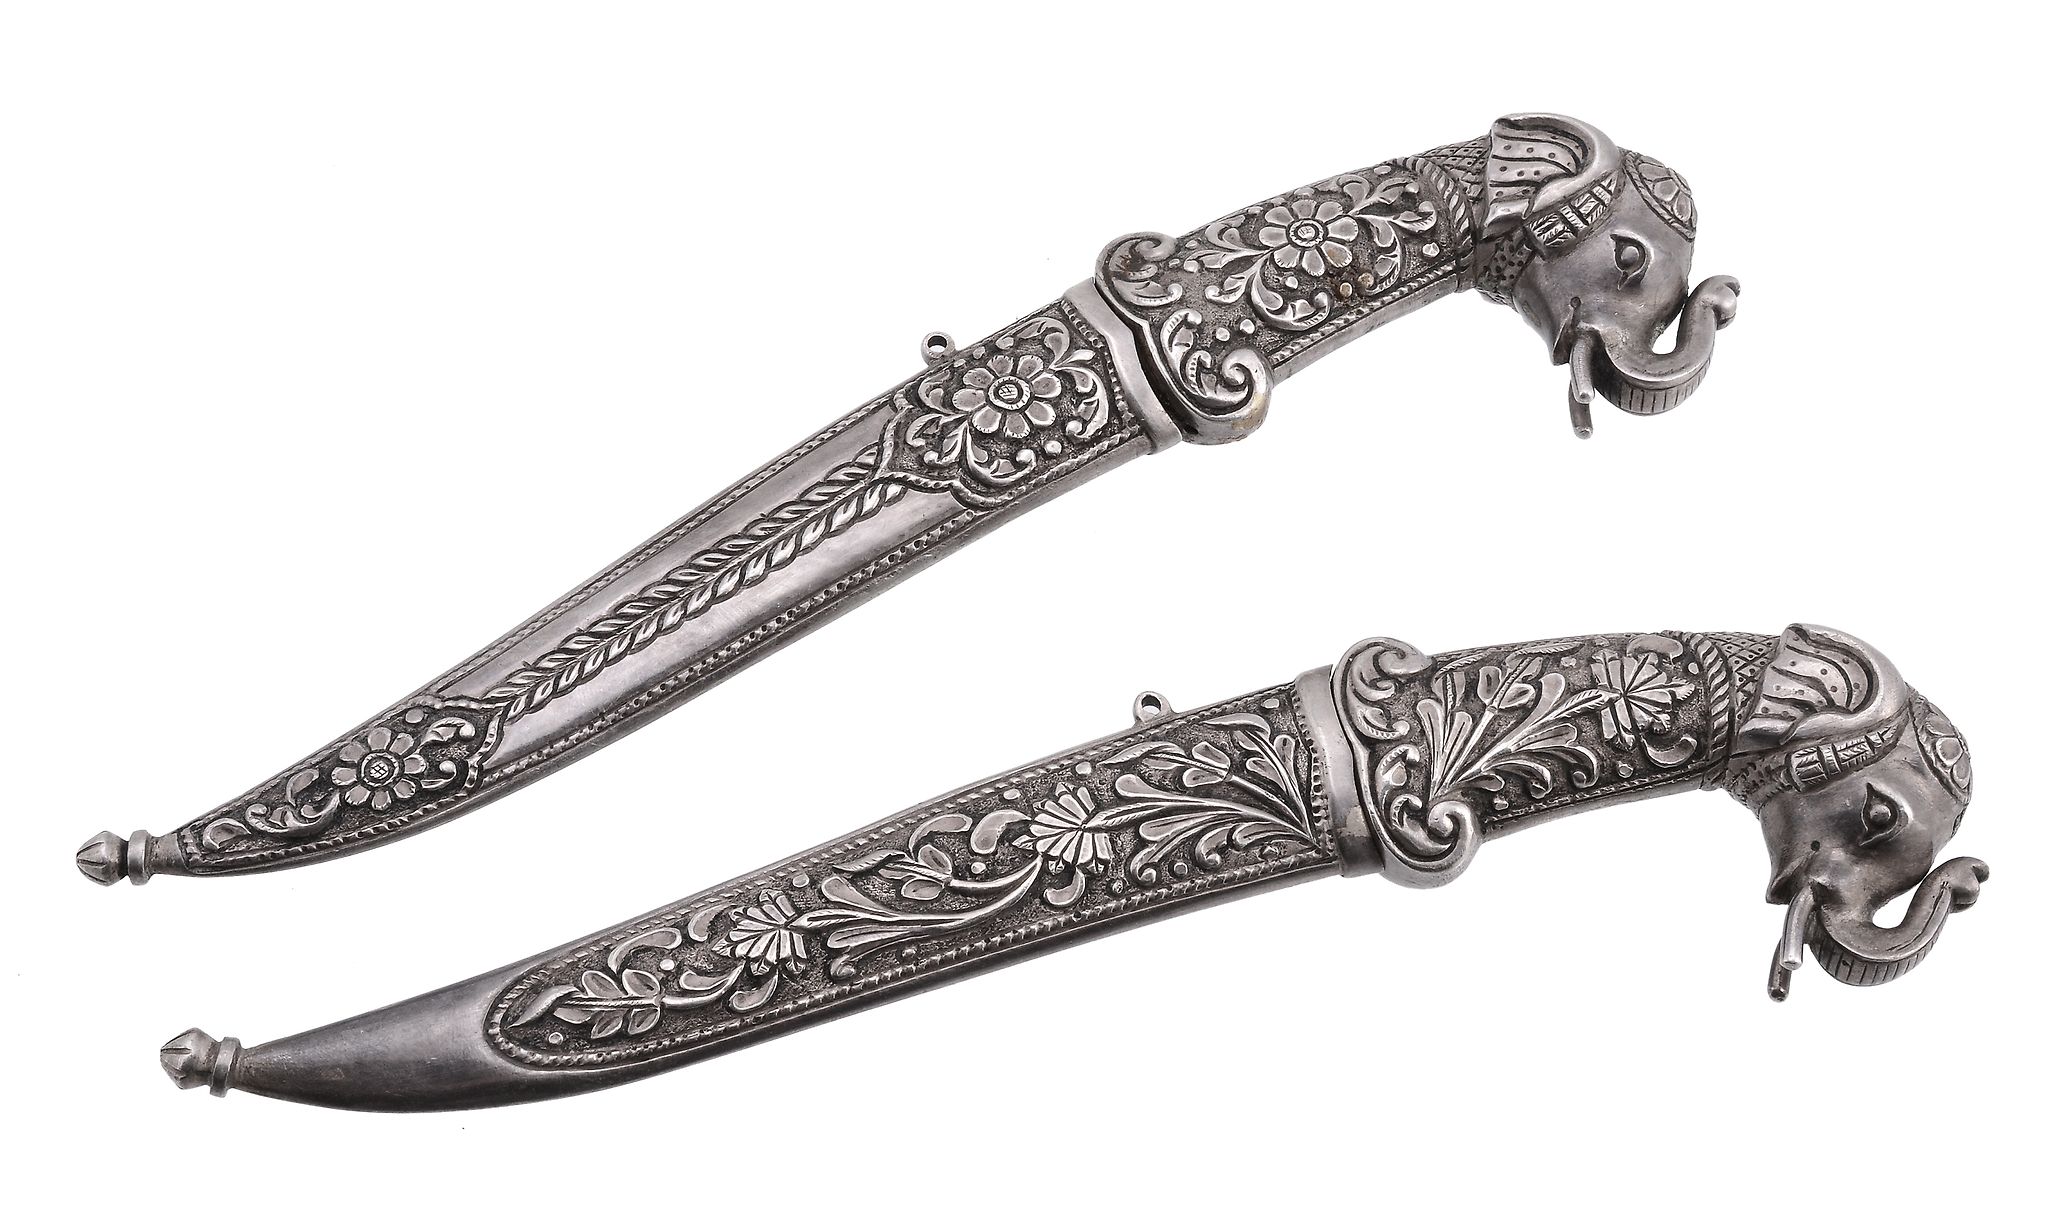 Two Indian silver mounted daggers, 19th century  Two Indian silver mounted daggers,   19th